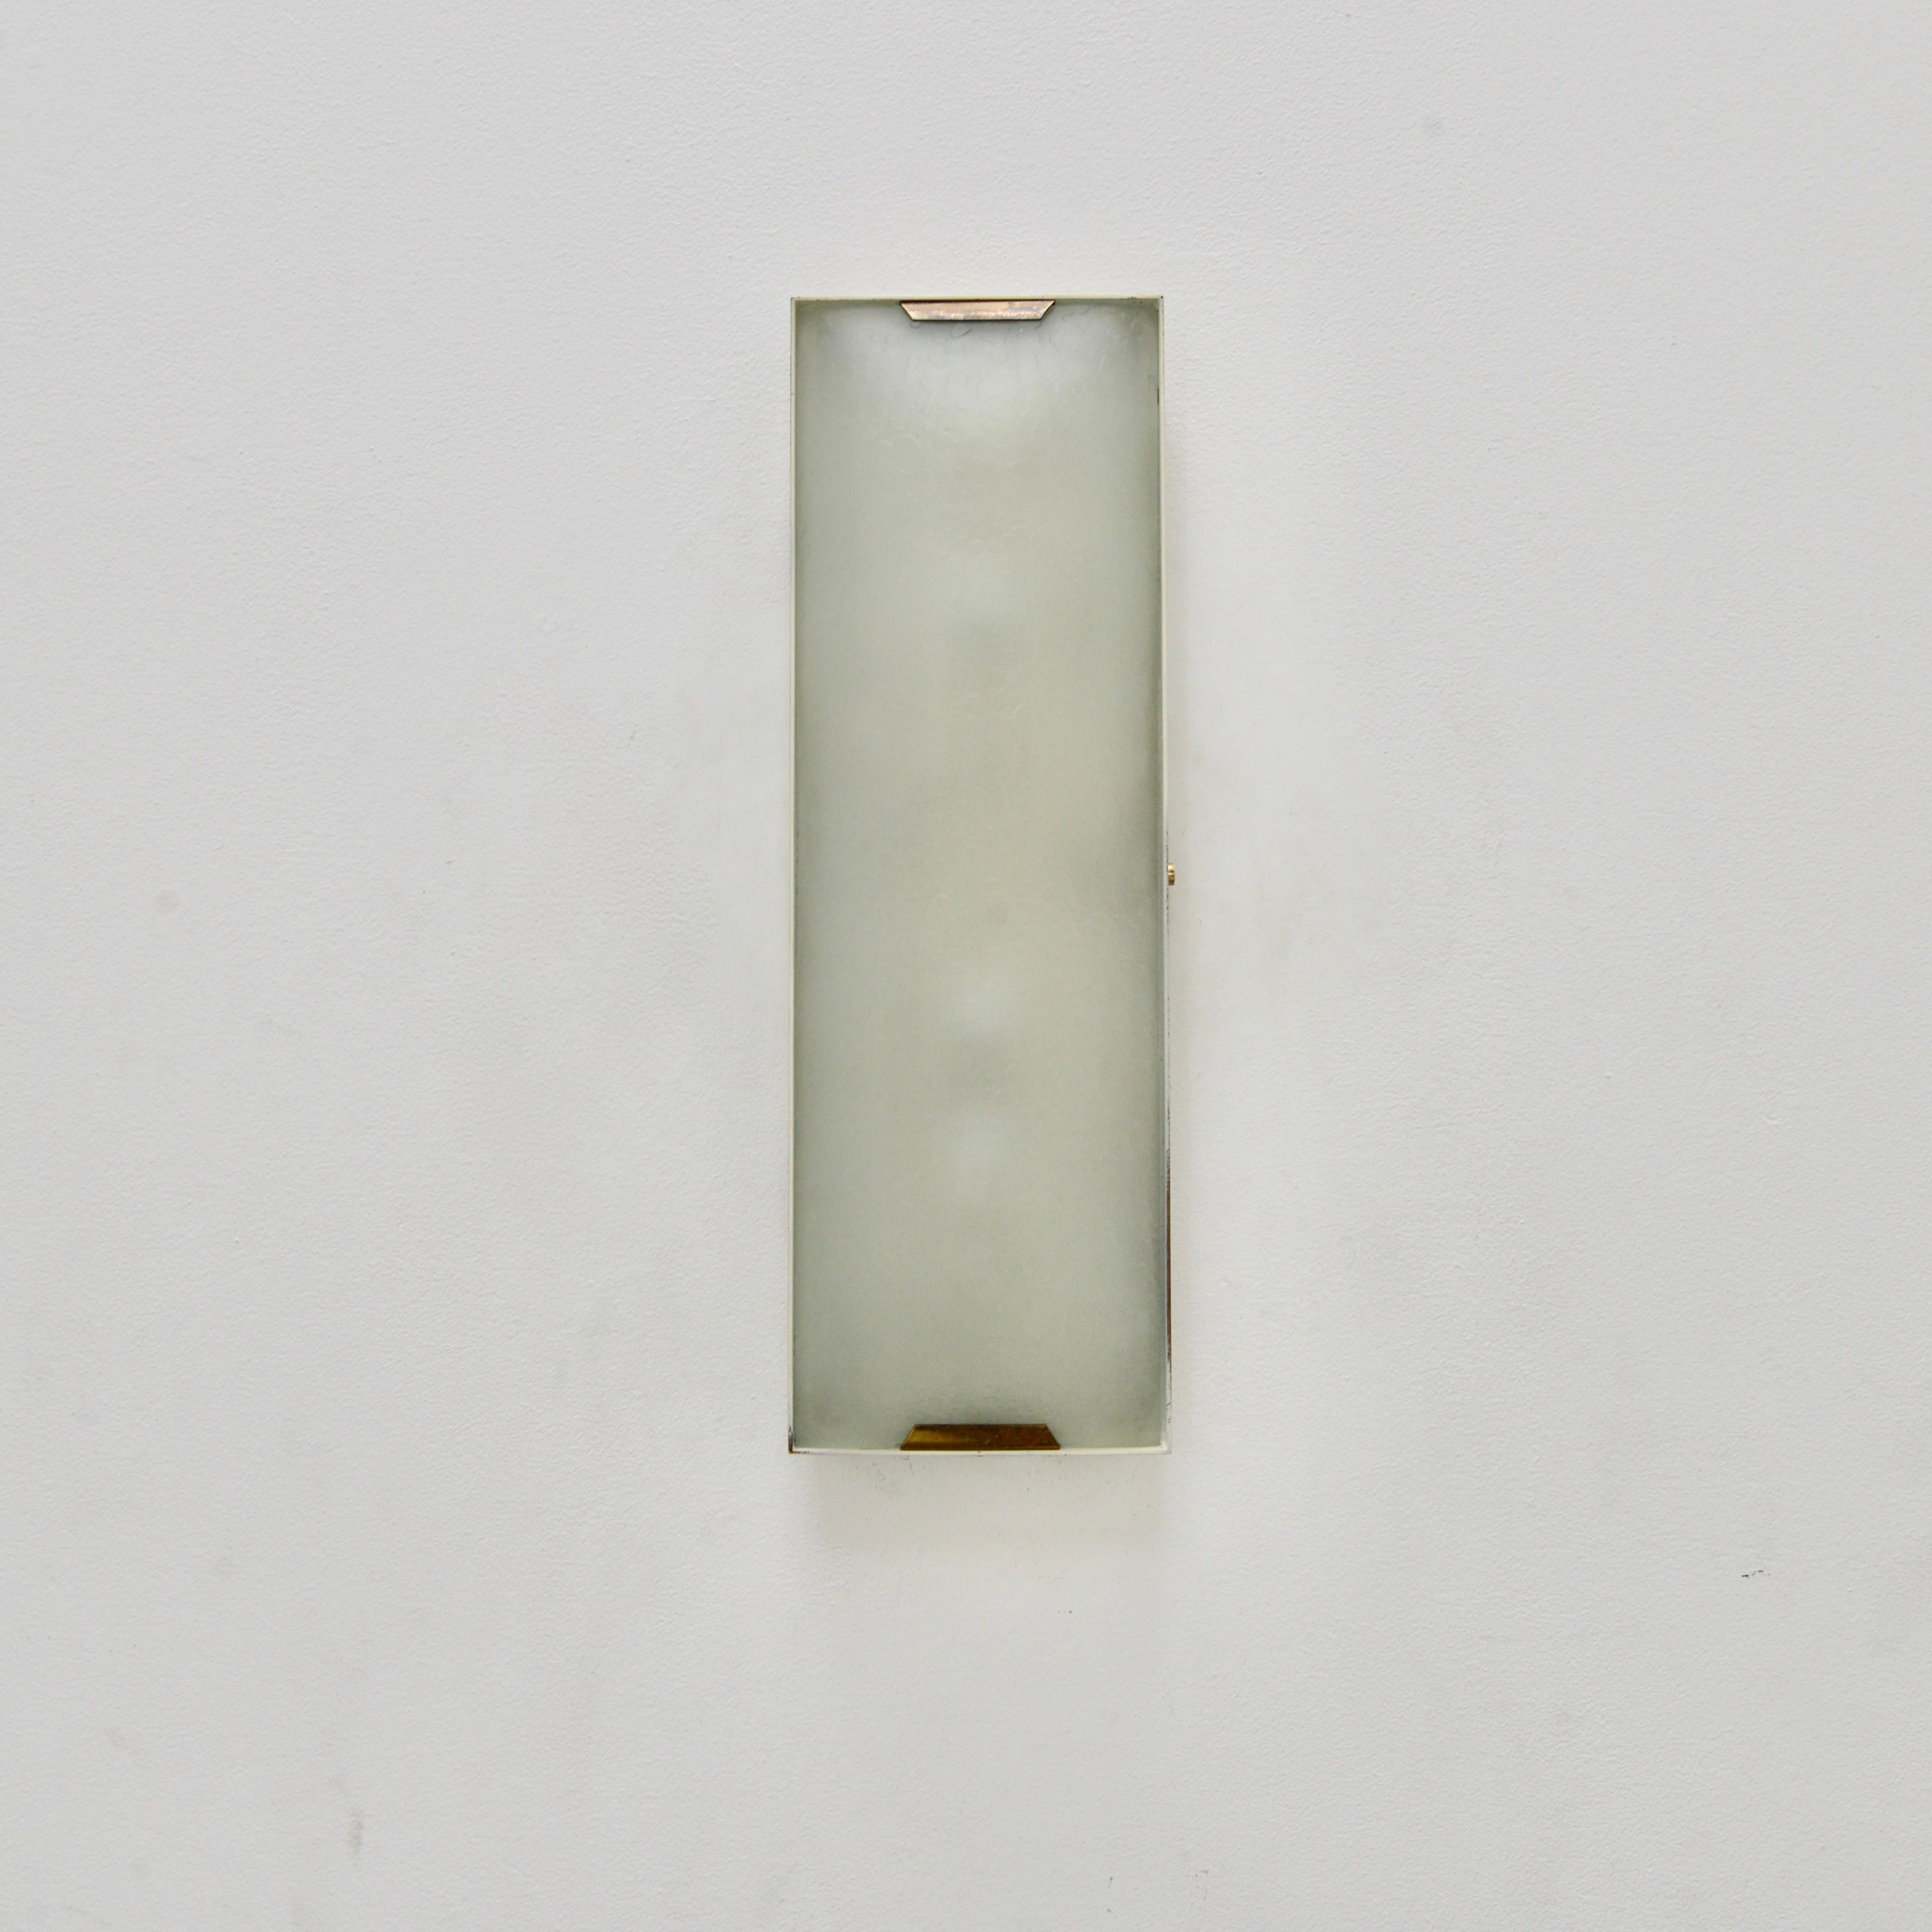 Fantastic 1950s pair of Stilnovo wall lights from Italy. These rectangular sconces are made from steel, naturally aged brass and incredible vintage Italian textured glass. They are rewired for use in the US with a (3) E12 candelabra based socket per